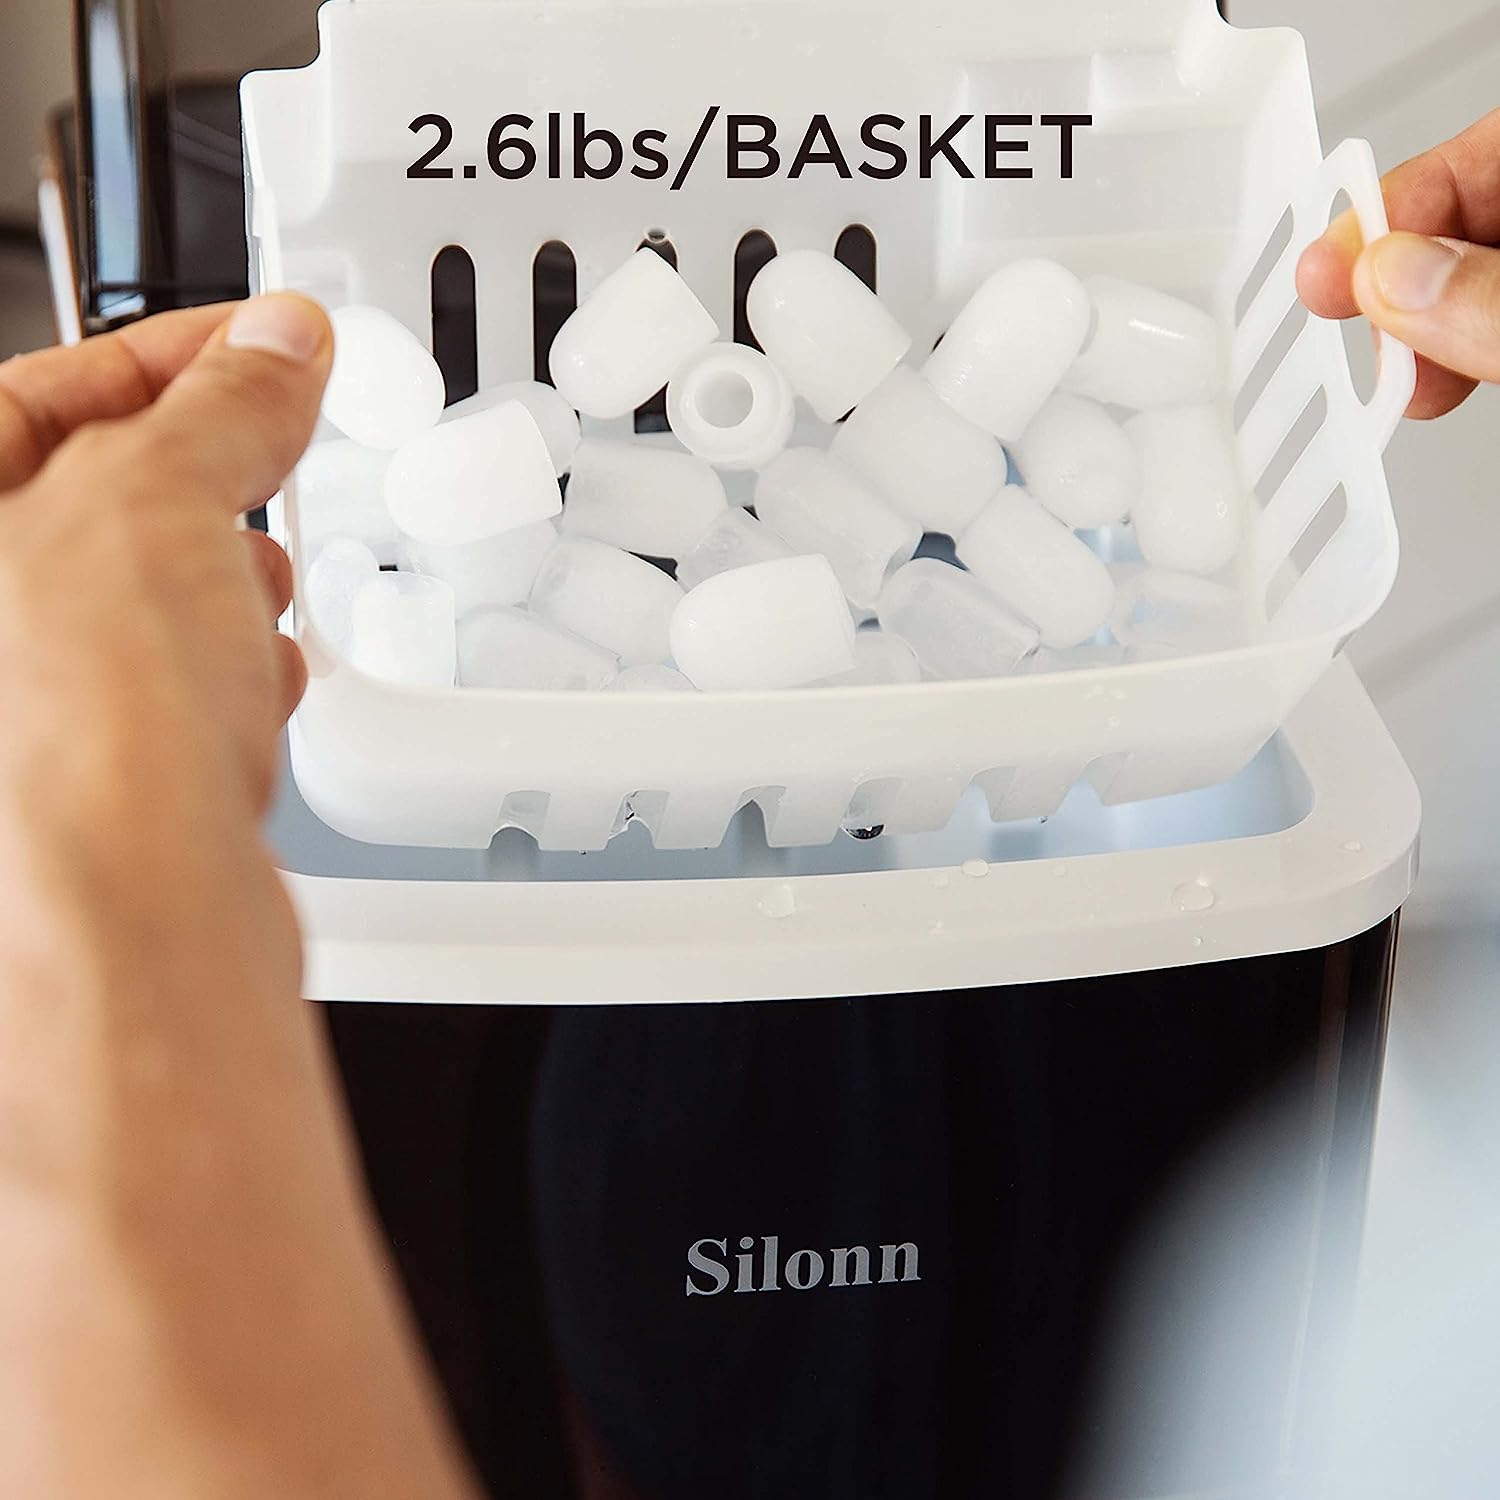 Silonn Icemaker SLIM01B Icemaker Review - Consumer Reports